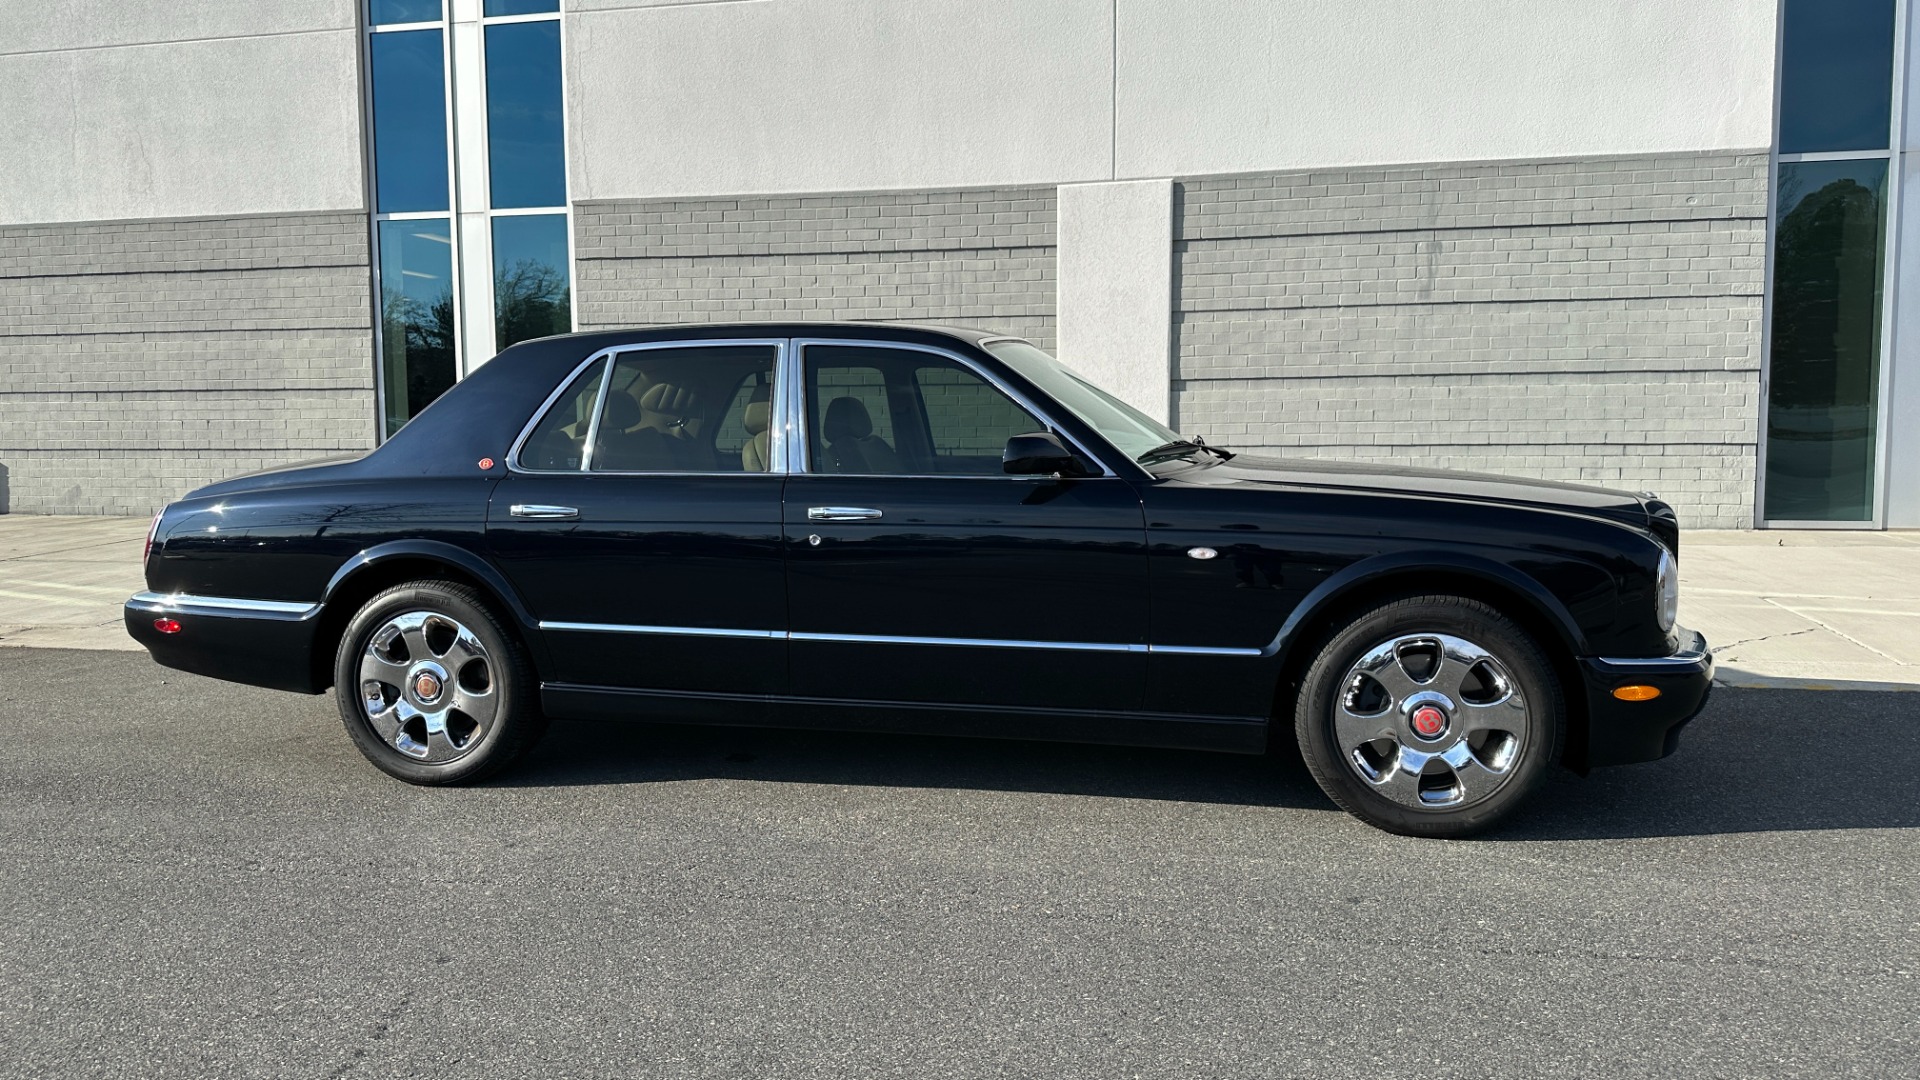 Used 2001 Bentley ARNAGE RED LABEL 6.75L V8 / TURBO / FULL LEATHER / WOOD TRIM / HEATED SEATS / SUNR for sale $26,999 at Formula Imports in Charlotte NC 28227 6